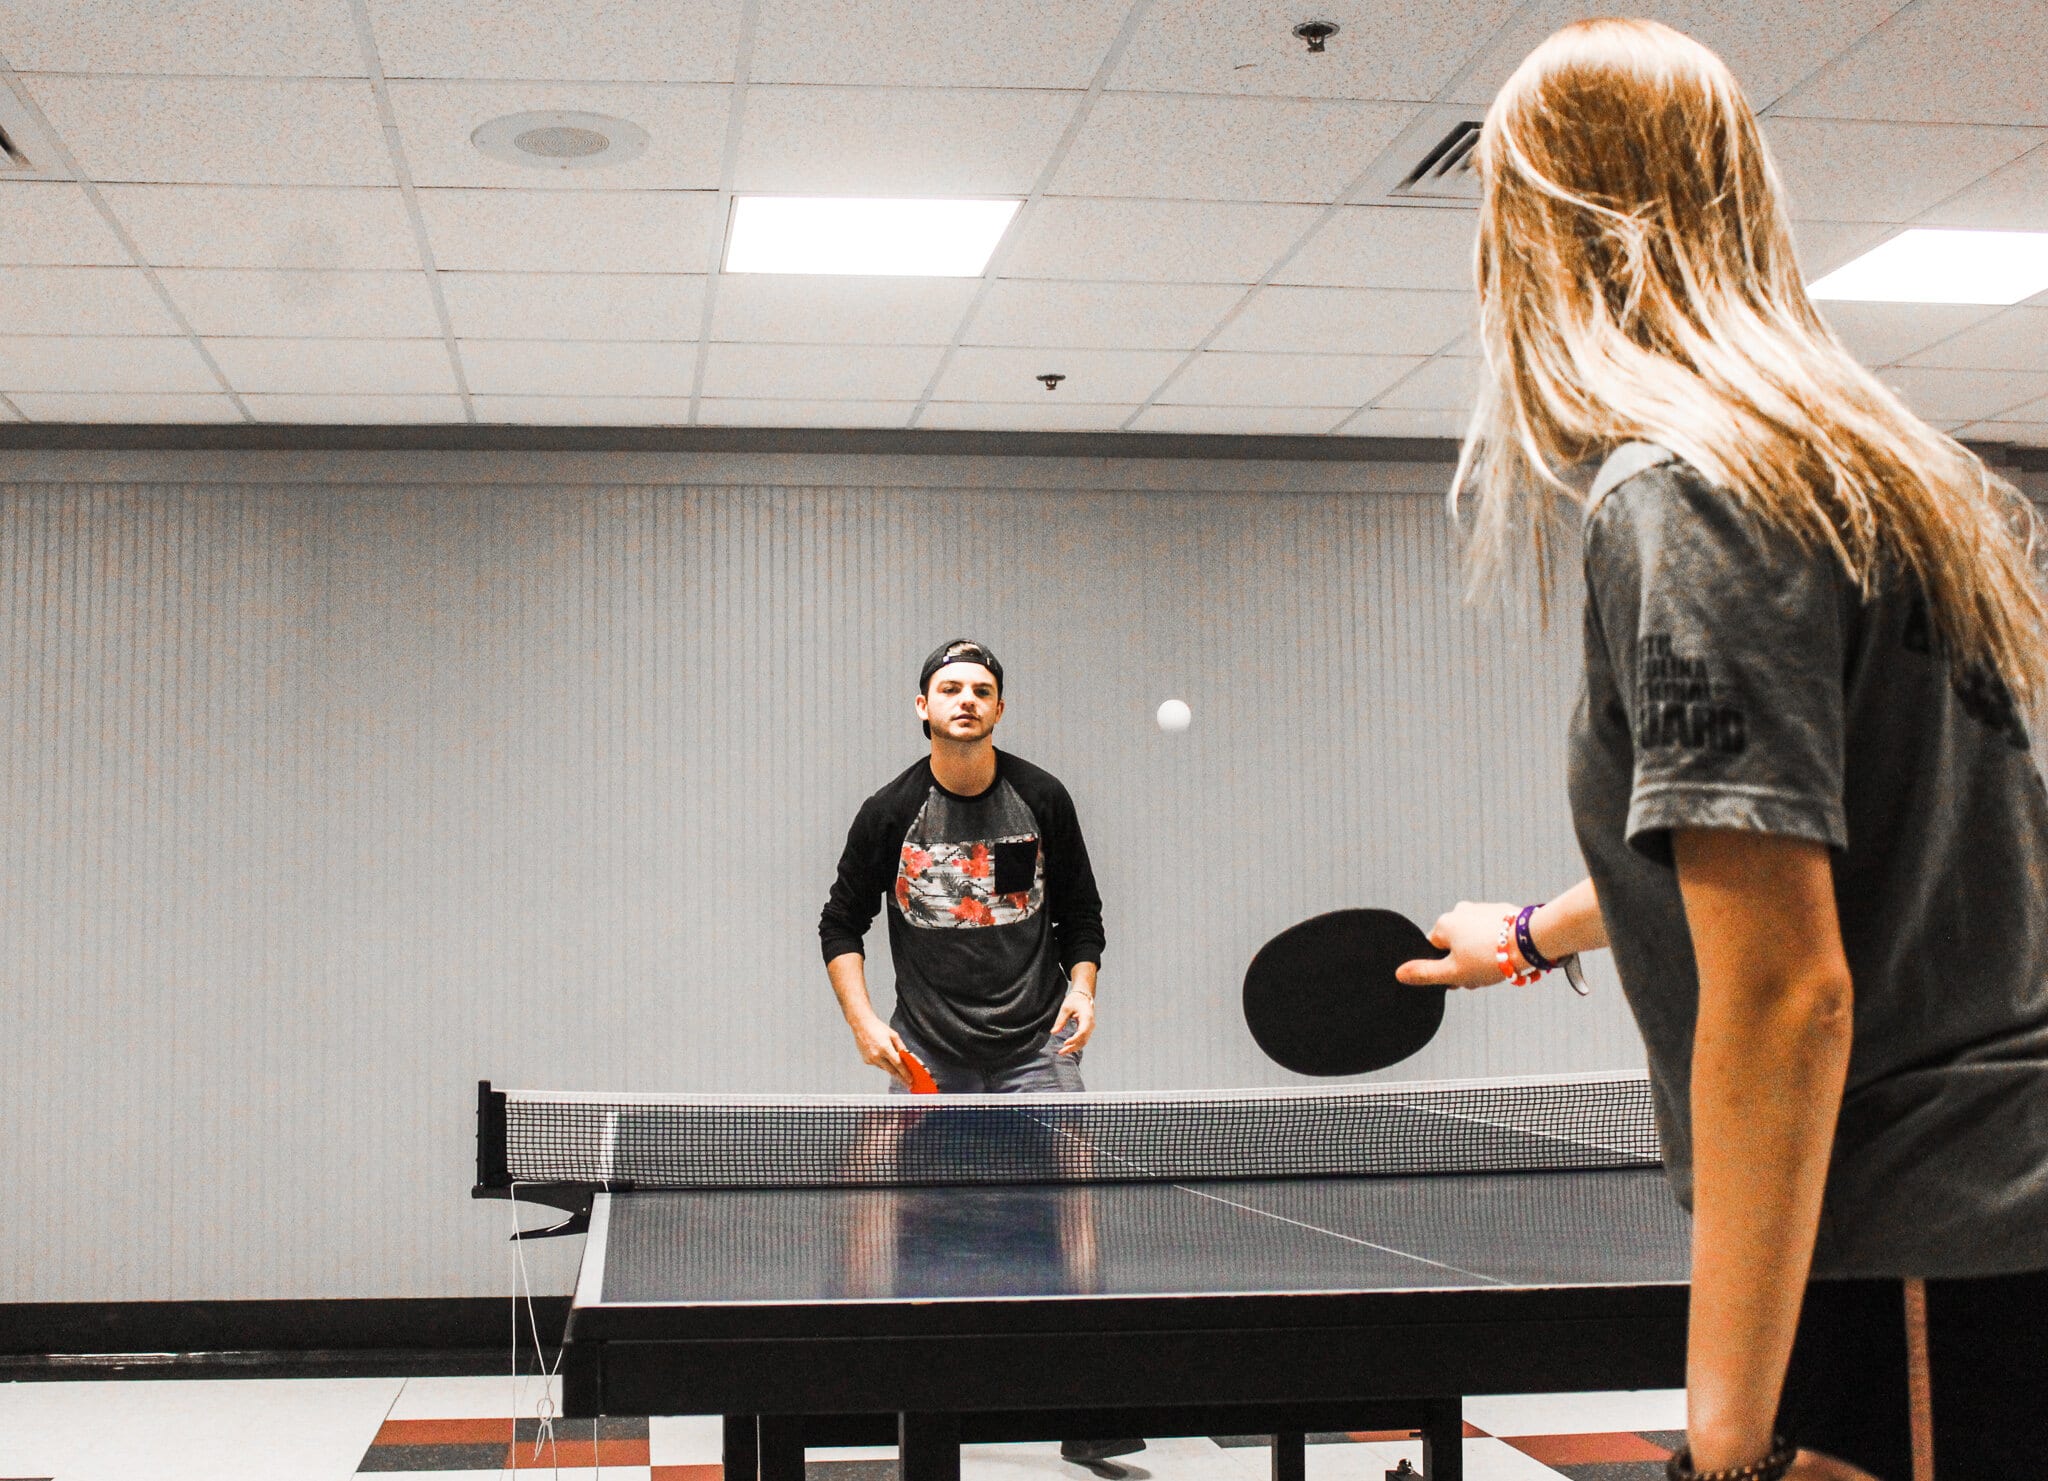 Jonathan Hannah, Sports Management major and Sydney Ackerman, Psychology major, play ping pong in the game room.